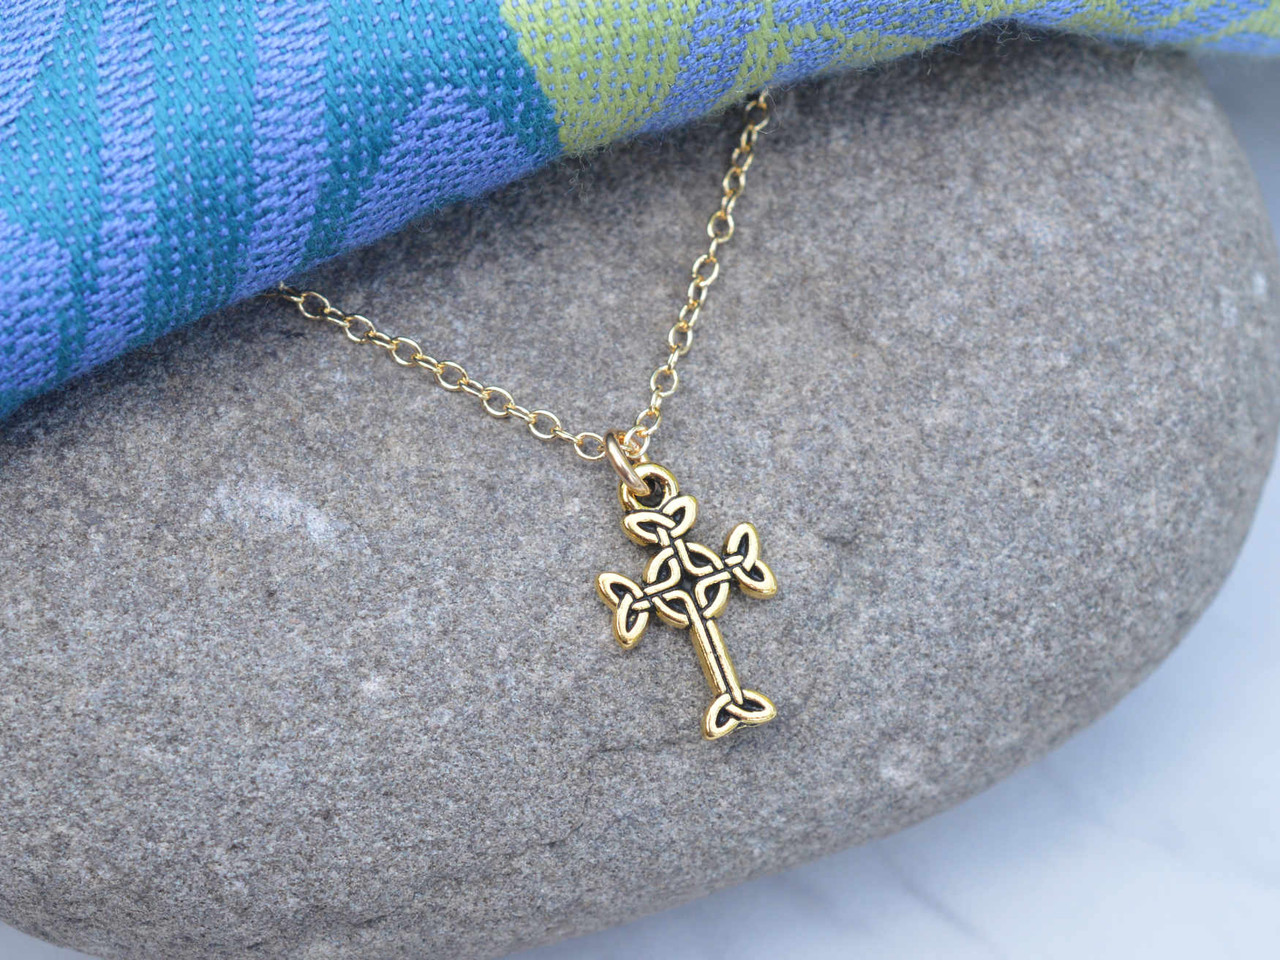 Gold Celtic Cross Necklaces from Dublin, Ireland